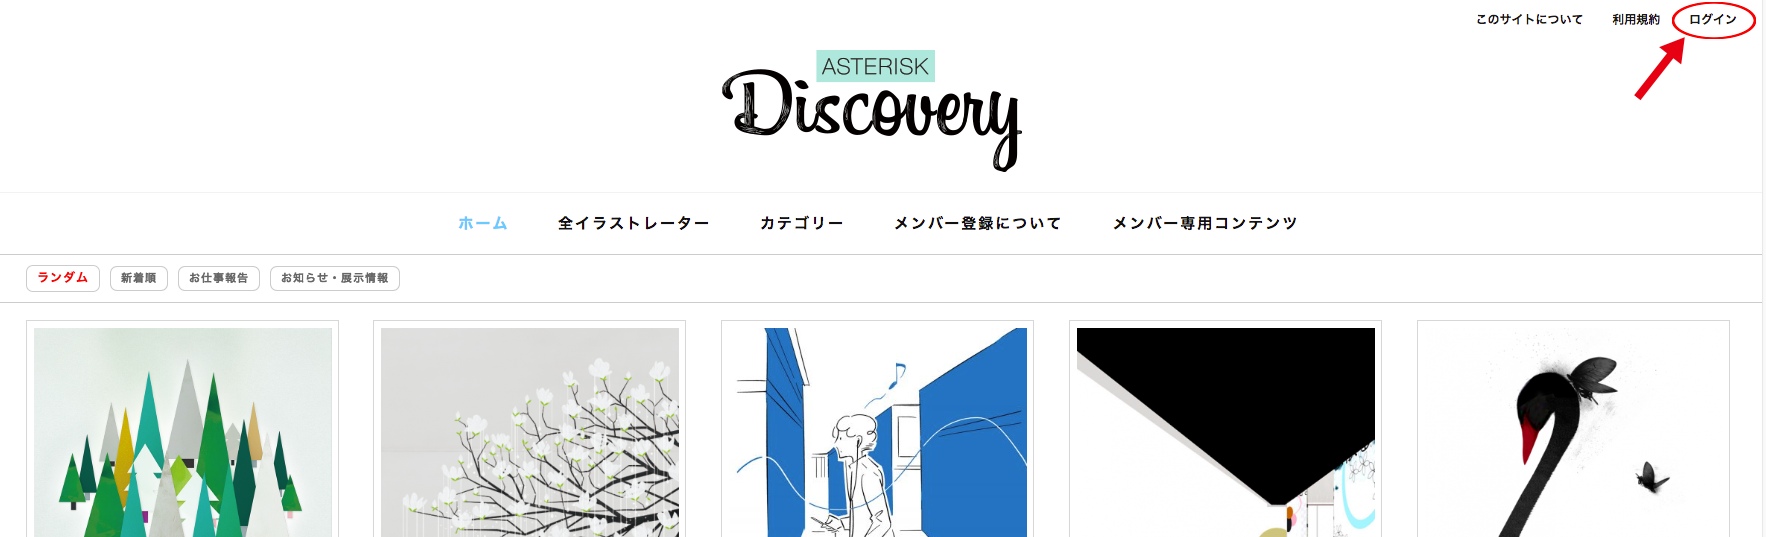 asterisk-discovery | マニュアル